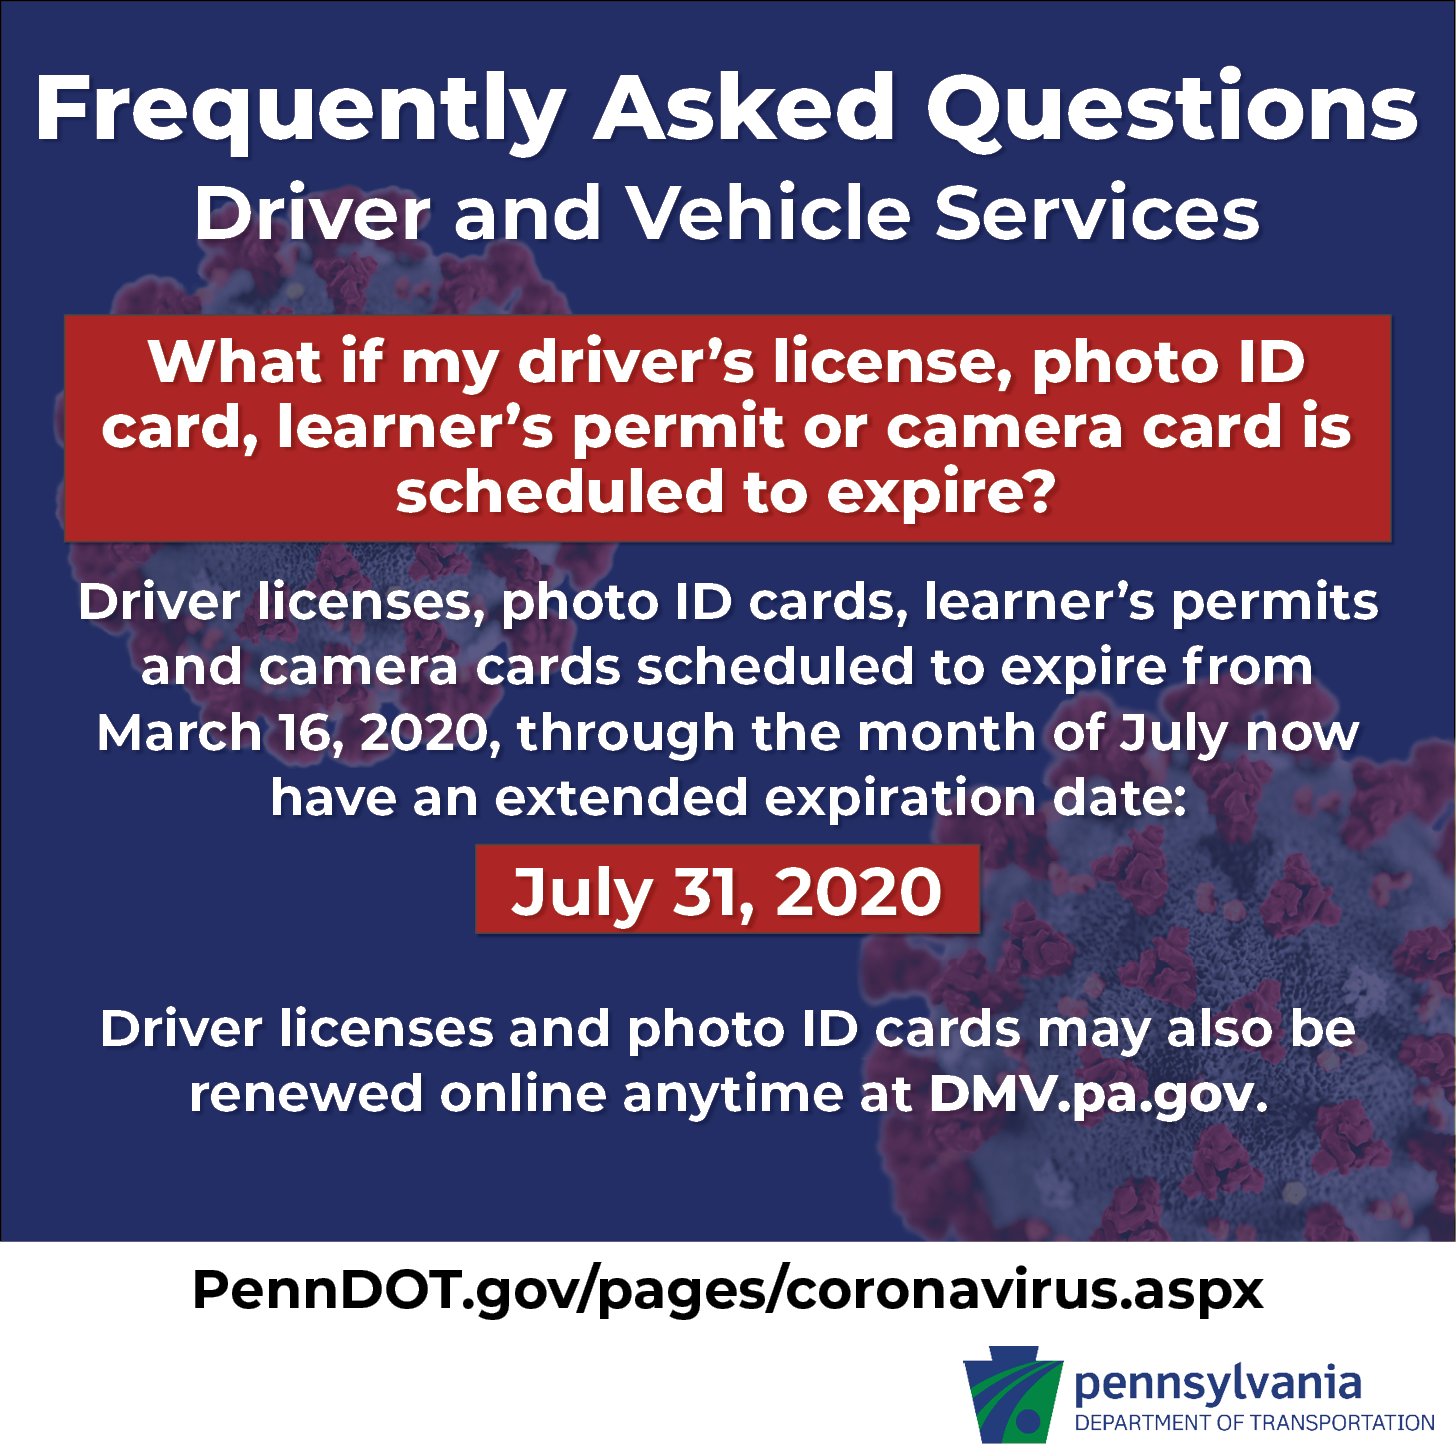 pa driver's license points check